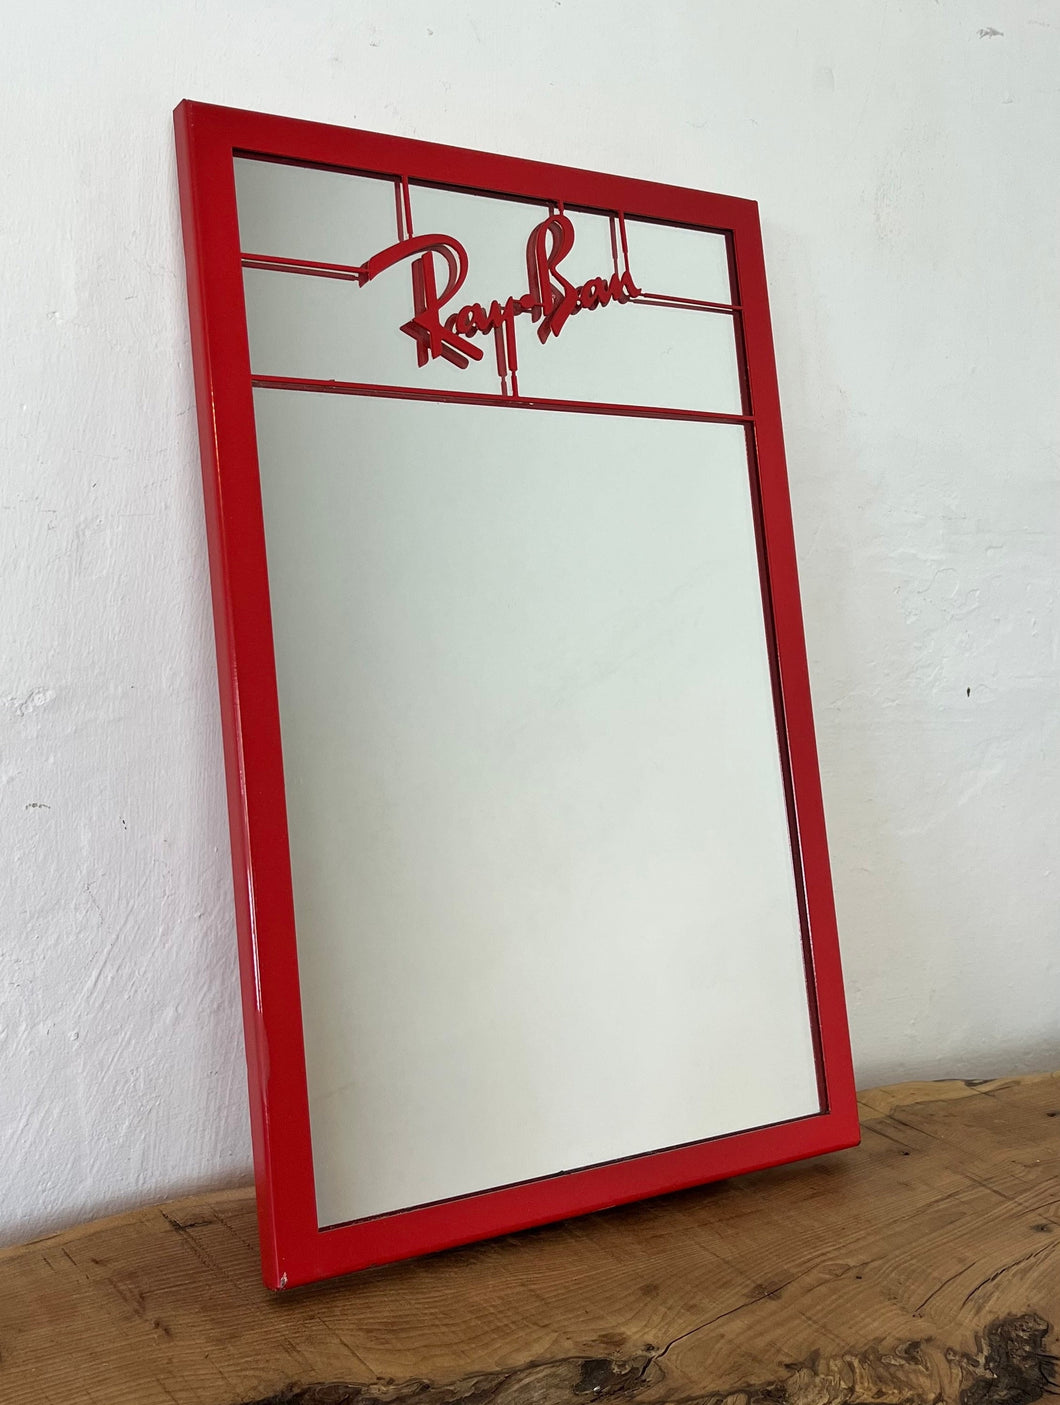 Vintage ray ban advertising mirror, sunglasses, shop display, picture, American - Italian, collectible piece